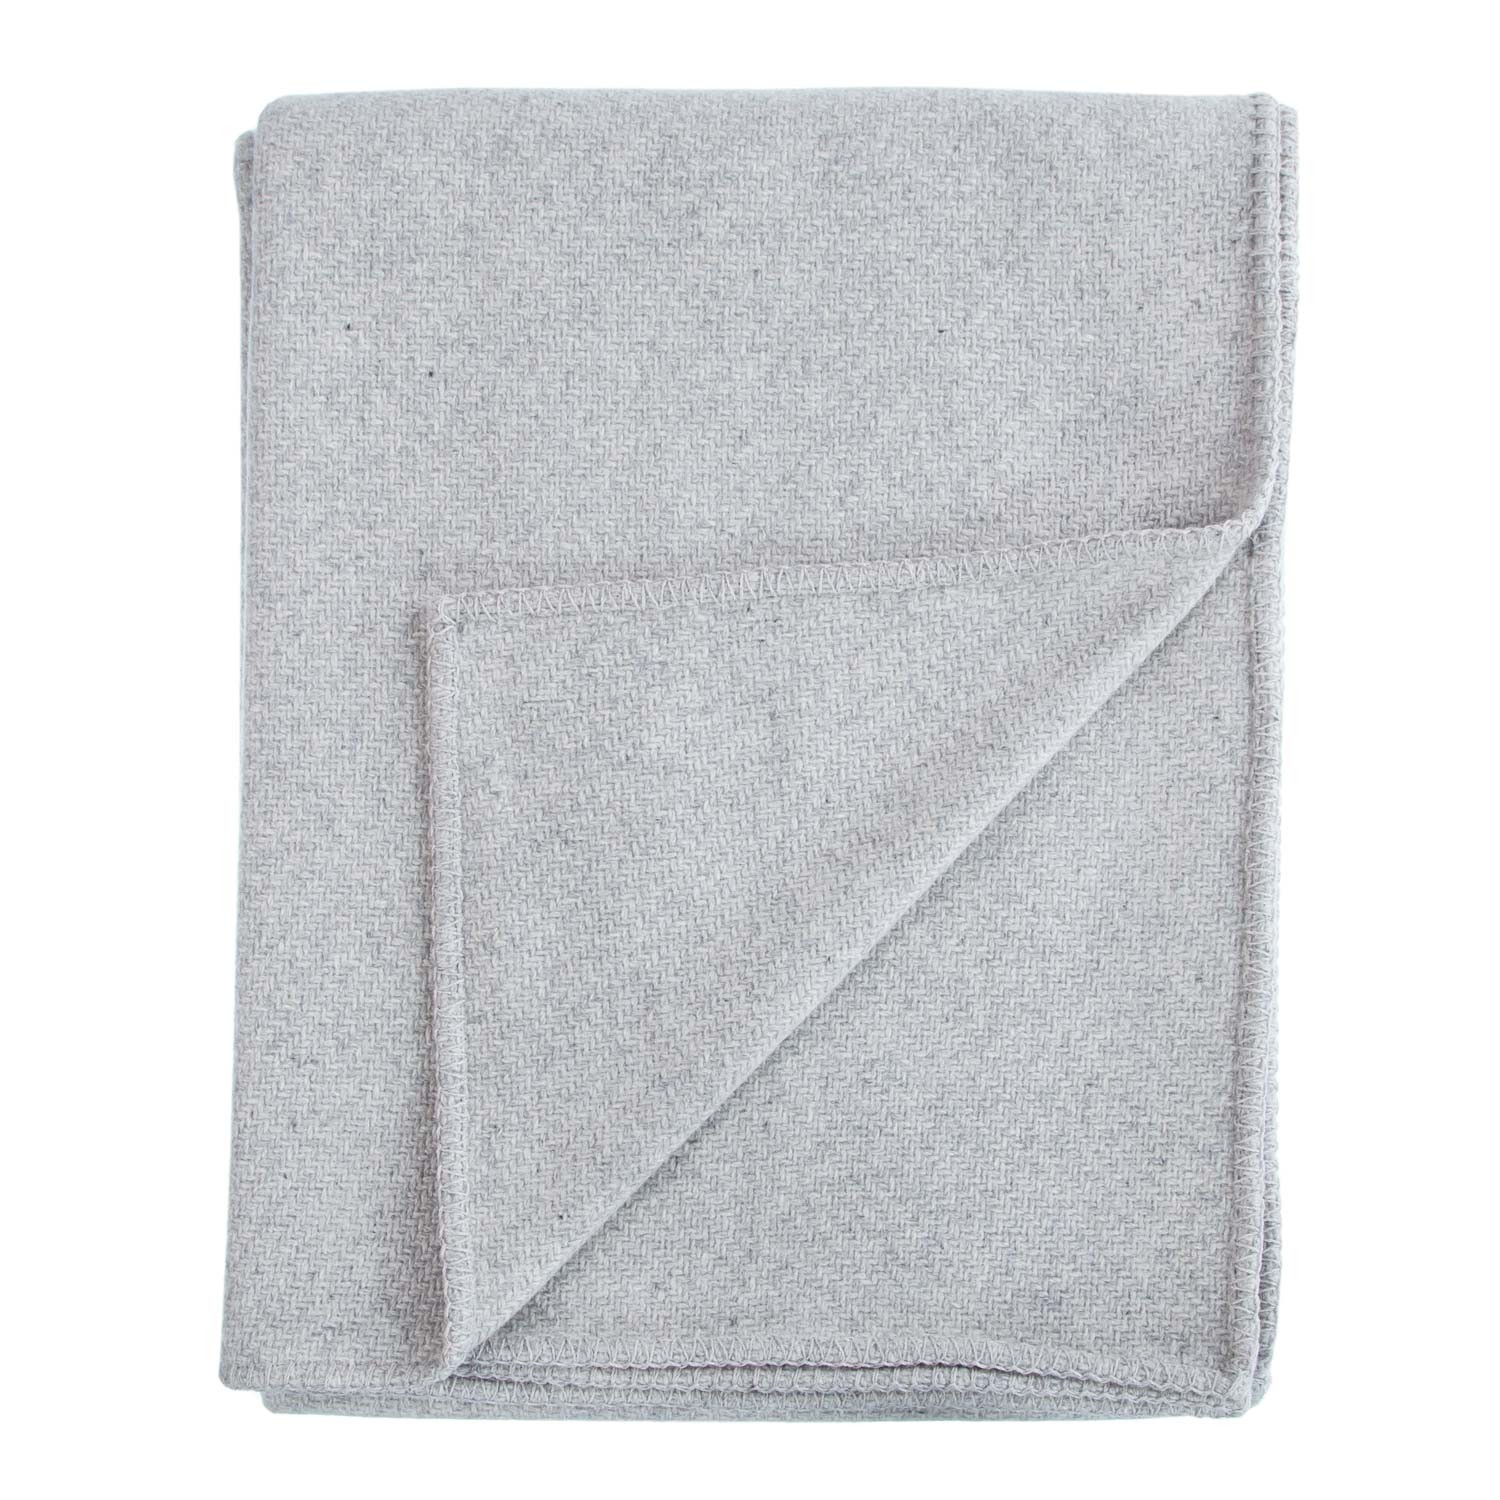 silver grey twill weave cashmere blanket. photo not available. ienprfv